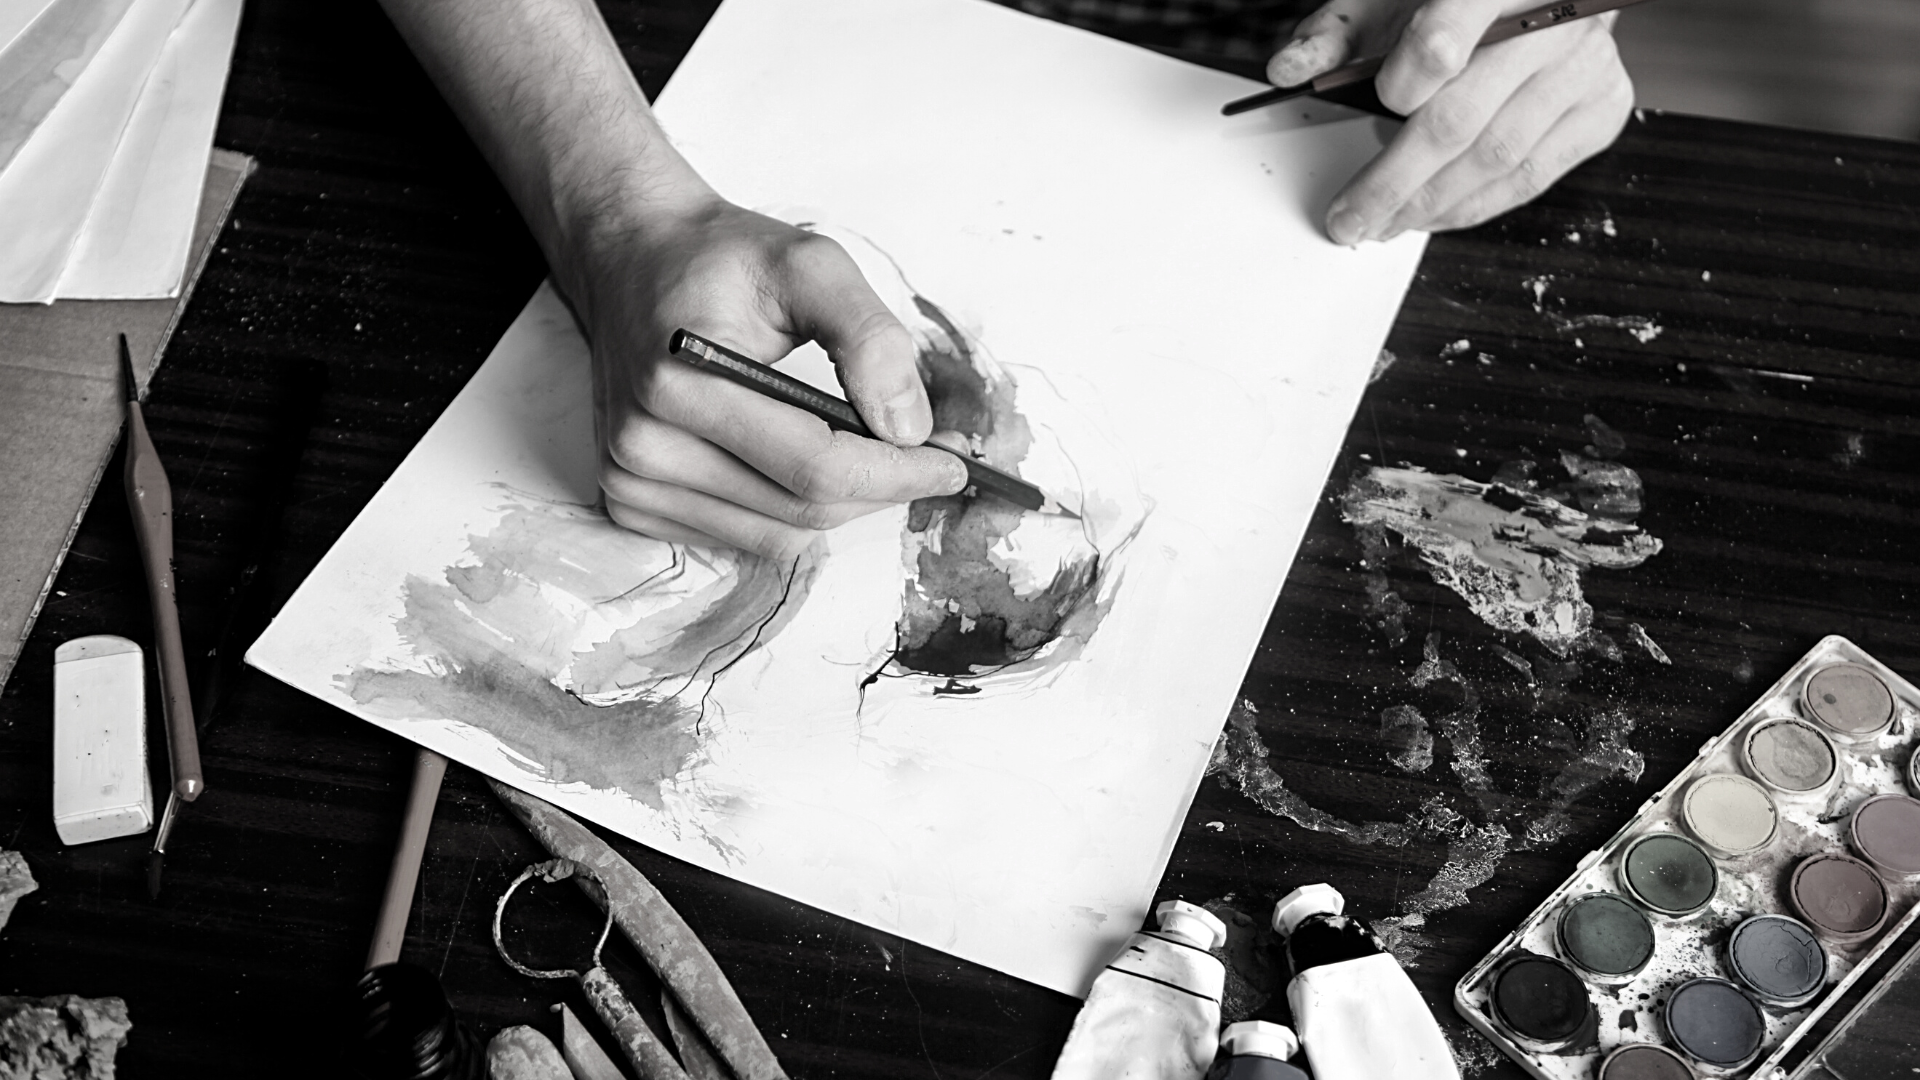 Minicourses: New Art Courses are officially open for registration!